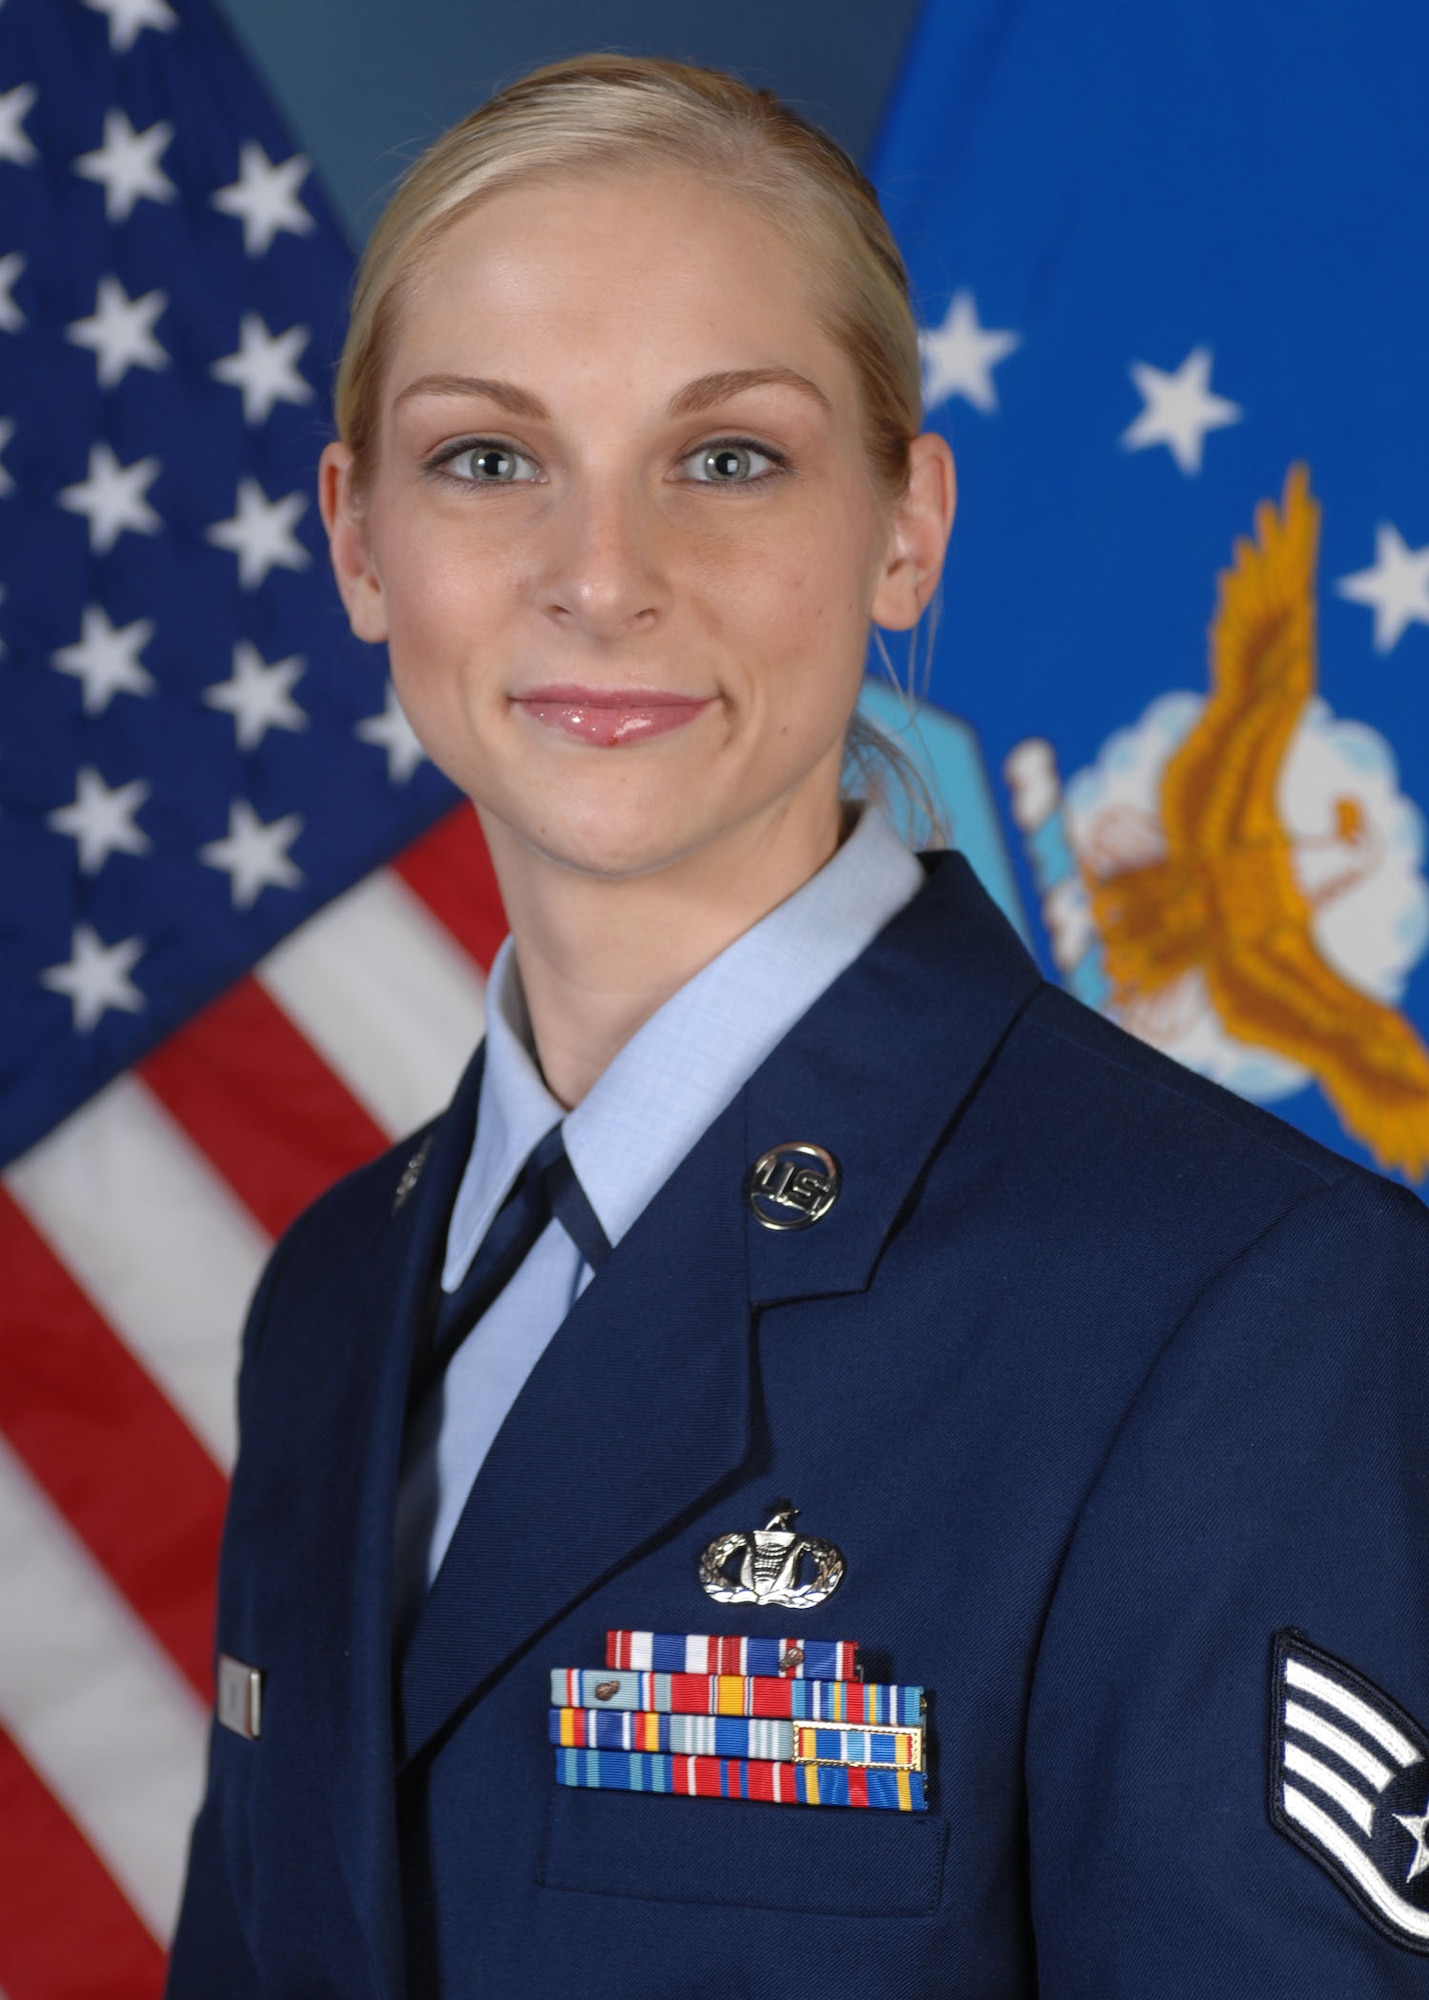 OFFUTT AIR FORCE BASE, Neb. -- Staff Sgt. Hollie A. Lay, from Shaw AFB, S.C., is one of 29 Airmen nominated for awards who will attend the 2010 Air Combat Command Outstanding Airmen of the Year Awards Banquet in Omaha, Neb., April 21. Sergeant Lay is nominated for the NCO of the Year Award. U.S. Air Force courtesy photo